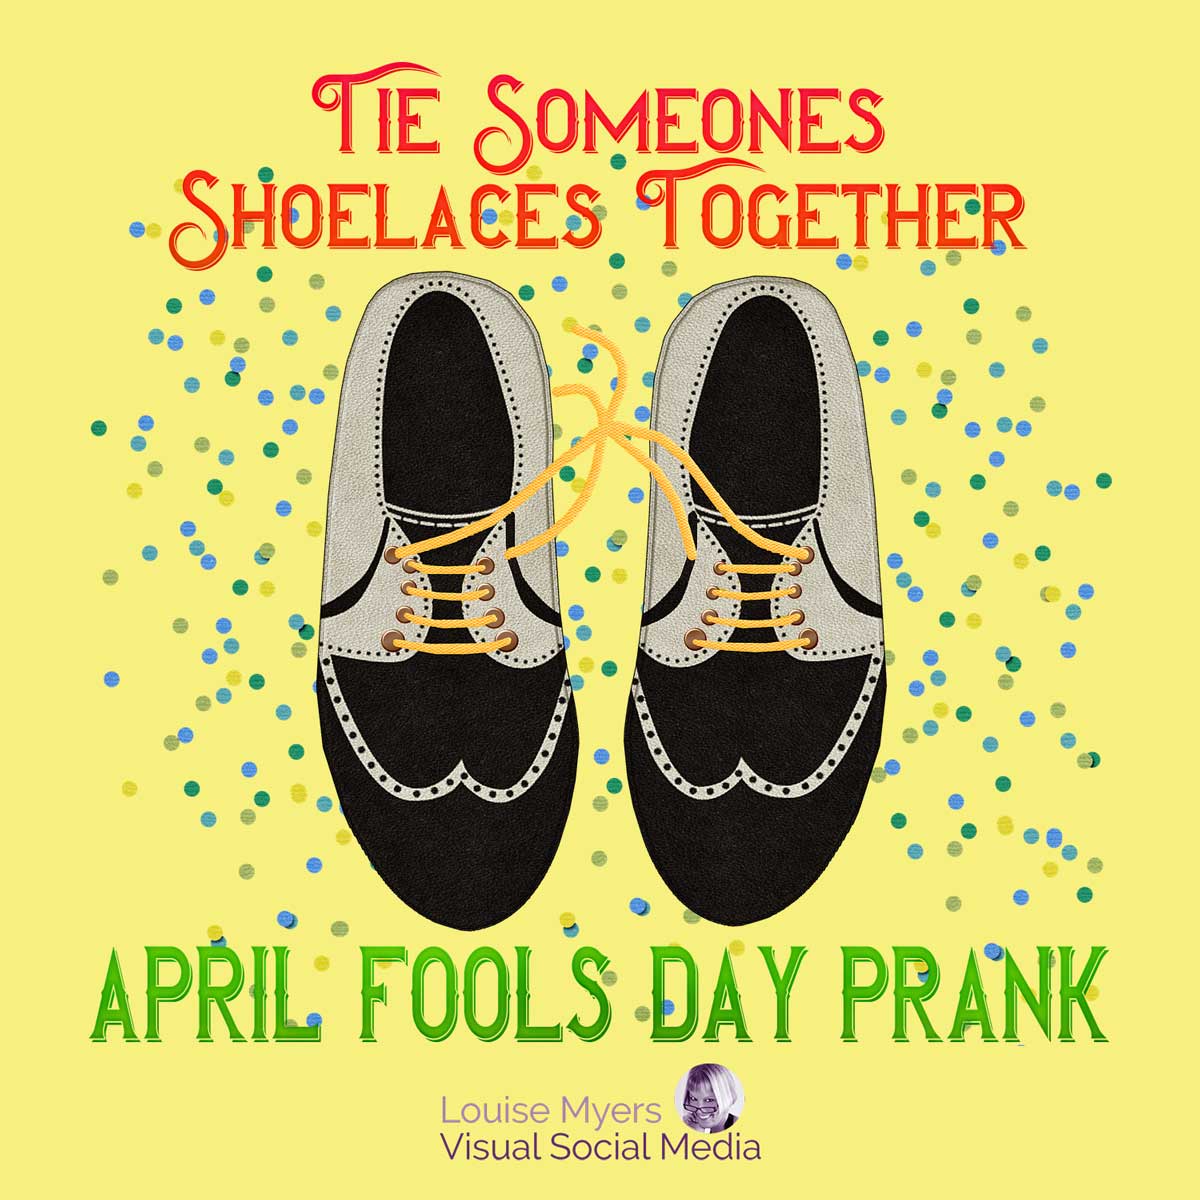 April Fool's Day Quotes & Images to Tickle Your Funny Bone | LouiseM